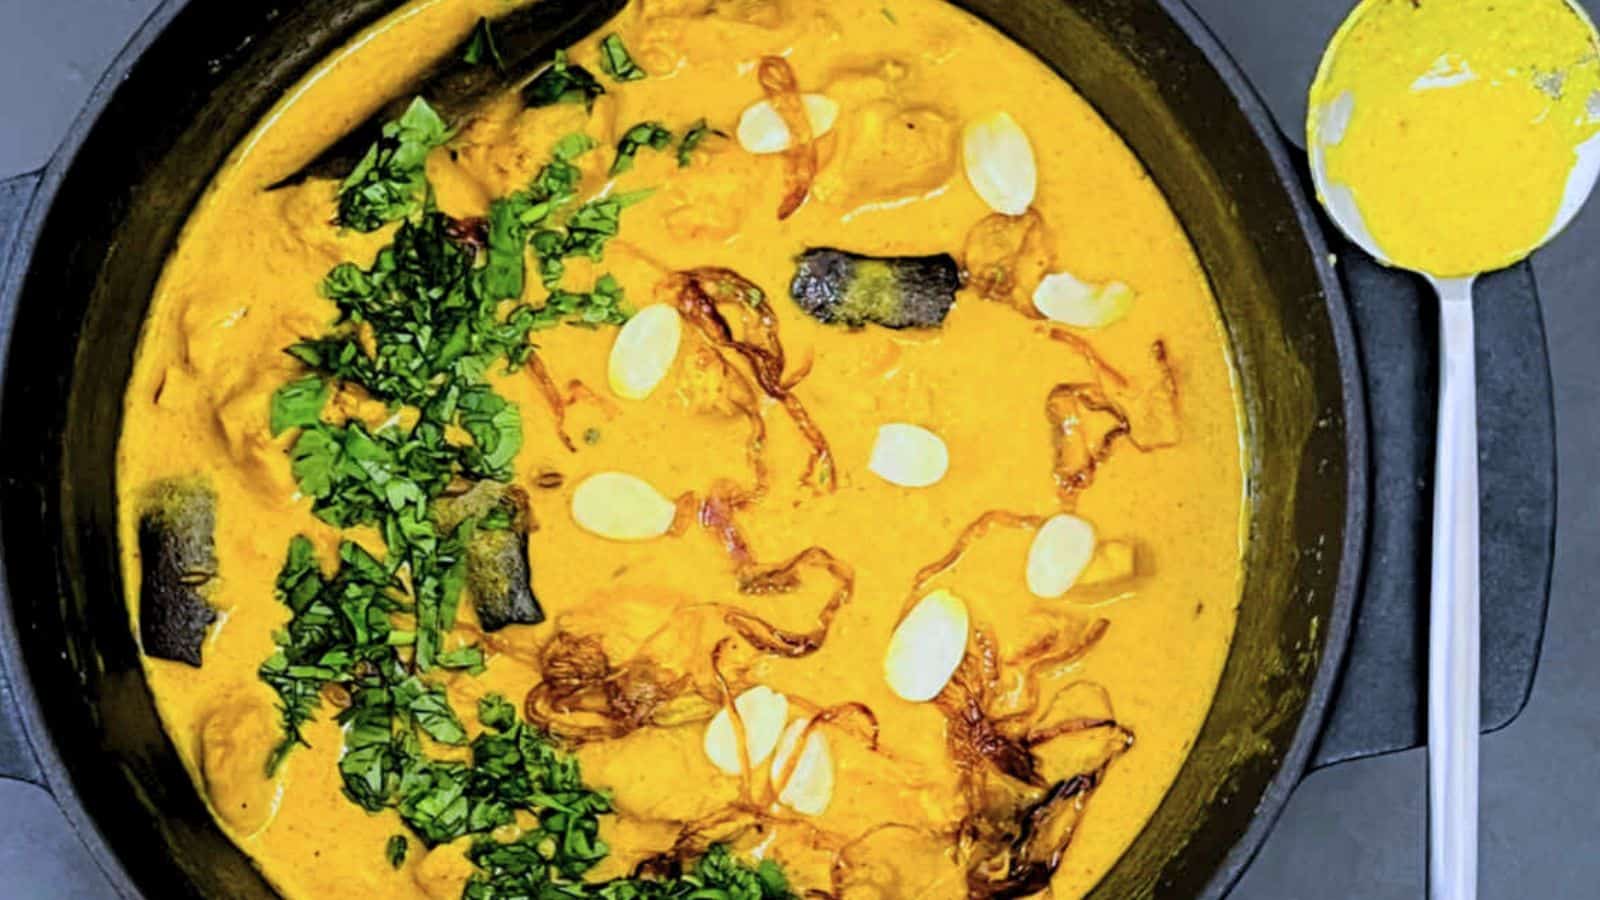 <p>Want something creamy and comforting? Our Chicken Korma recipe is the answer! Tender chicken simmered in a rich, spiced sauce is sure to warm you up on chilly evenings. With its satisfying flavors and easy preparation, it's no wonder this dish is a weeknight favorite among home cooks.<br><strong>Get the Recipe: </strong><a href="https://easyindiancookbook.com/chicken-korma/?utm_source=msn&utm_medium=page&utm_campaign=msn">Chicken Korma</a></p>